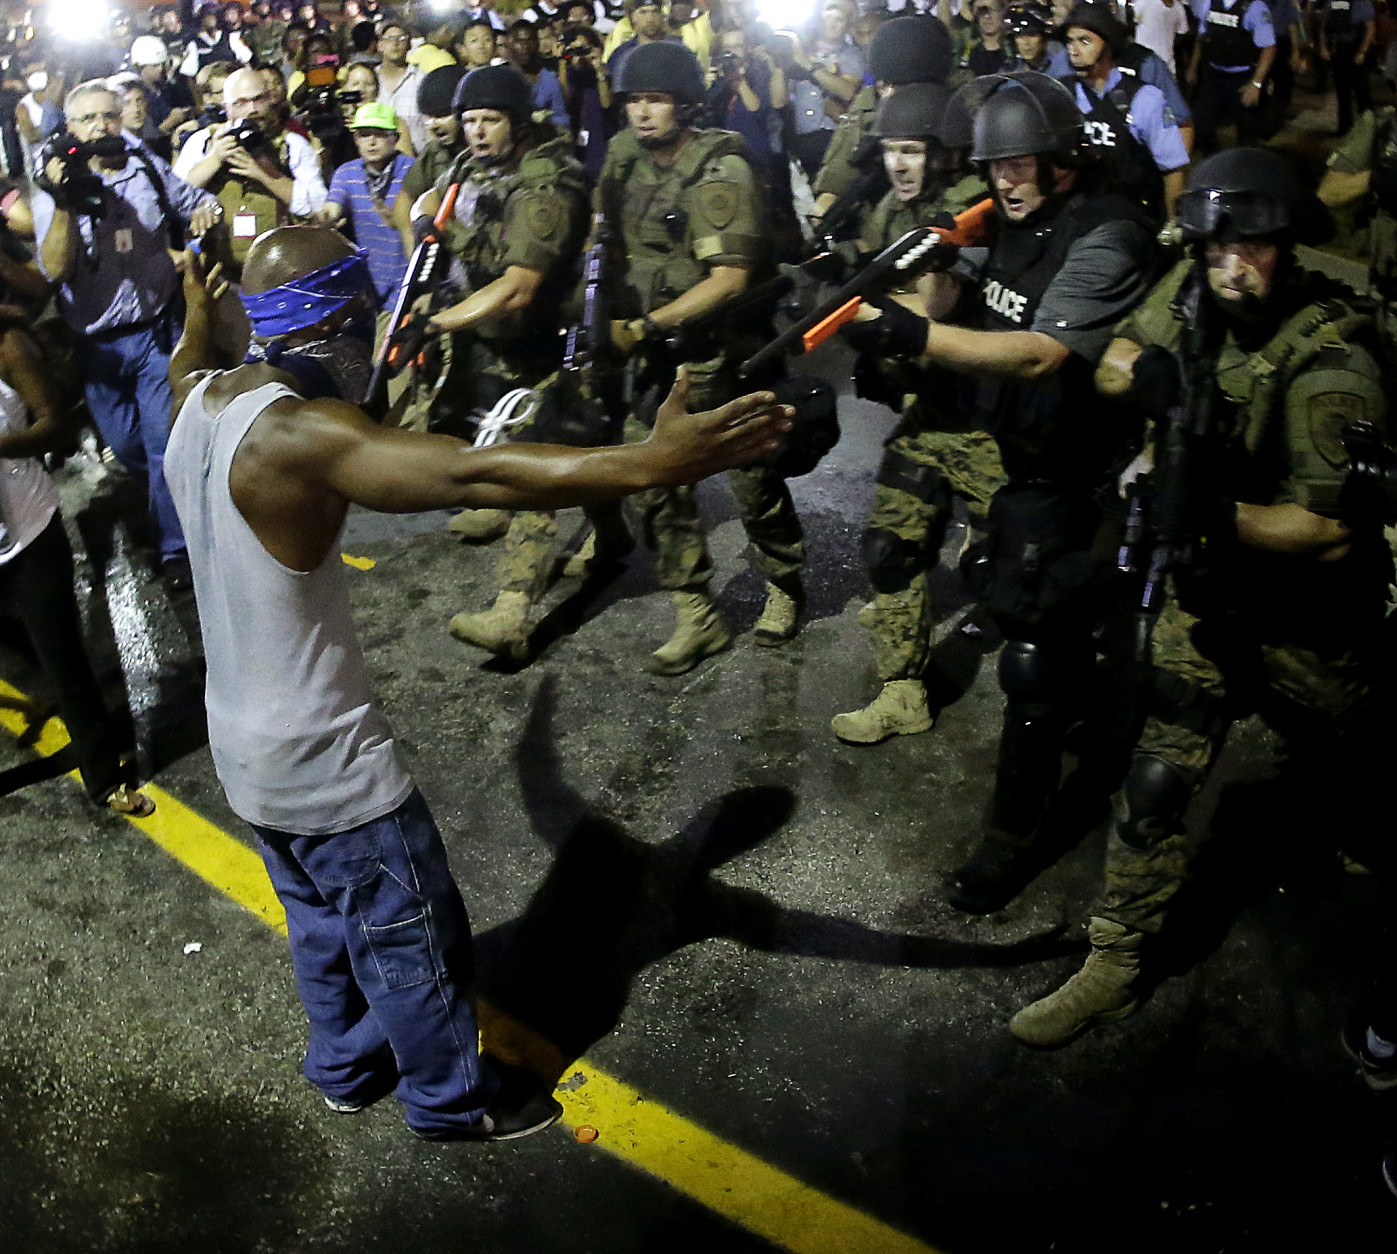 FOR USE AS DESIRED, YEAR END PHOTOS - FILE - Police arrest a man as they disperse a protest in Ferguson, Mo., early Wednesday, Aug. 20, 2014. On Saturday, Aug. 9, a white police officer fatally shot unarmed 18-year-old Michael Brown, who was black, in the St. Louis suburb. (AP Photo/Charlie Riedel, File)